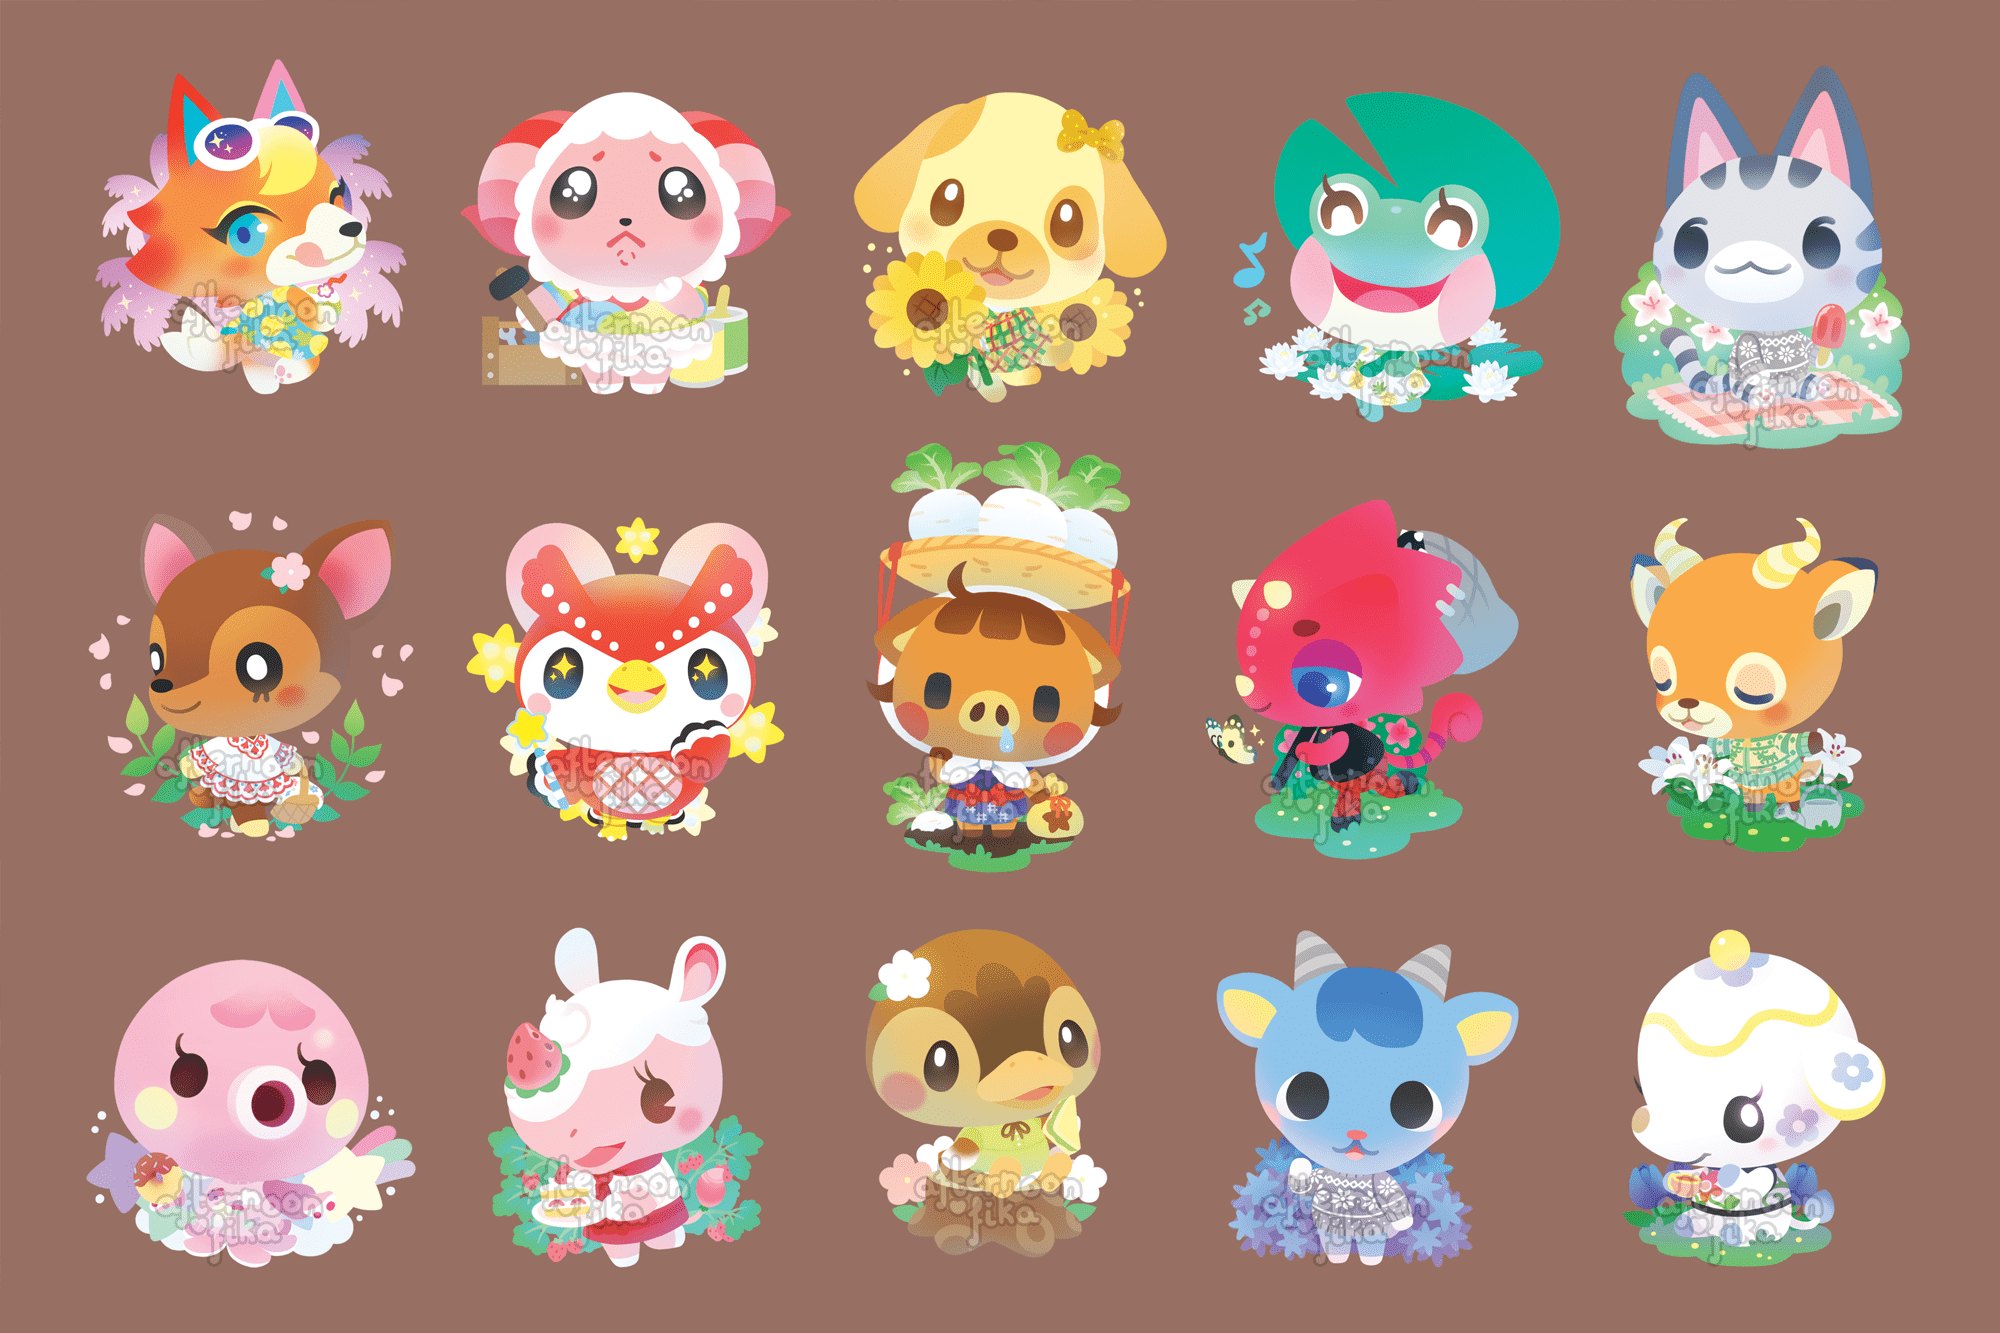 A collection of animal characters in different poses - Animal Crossing